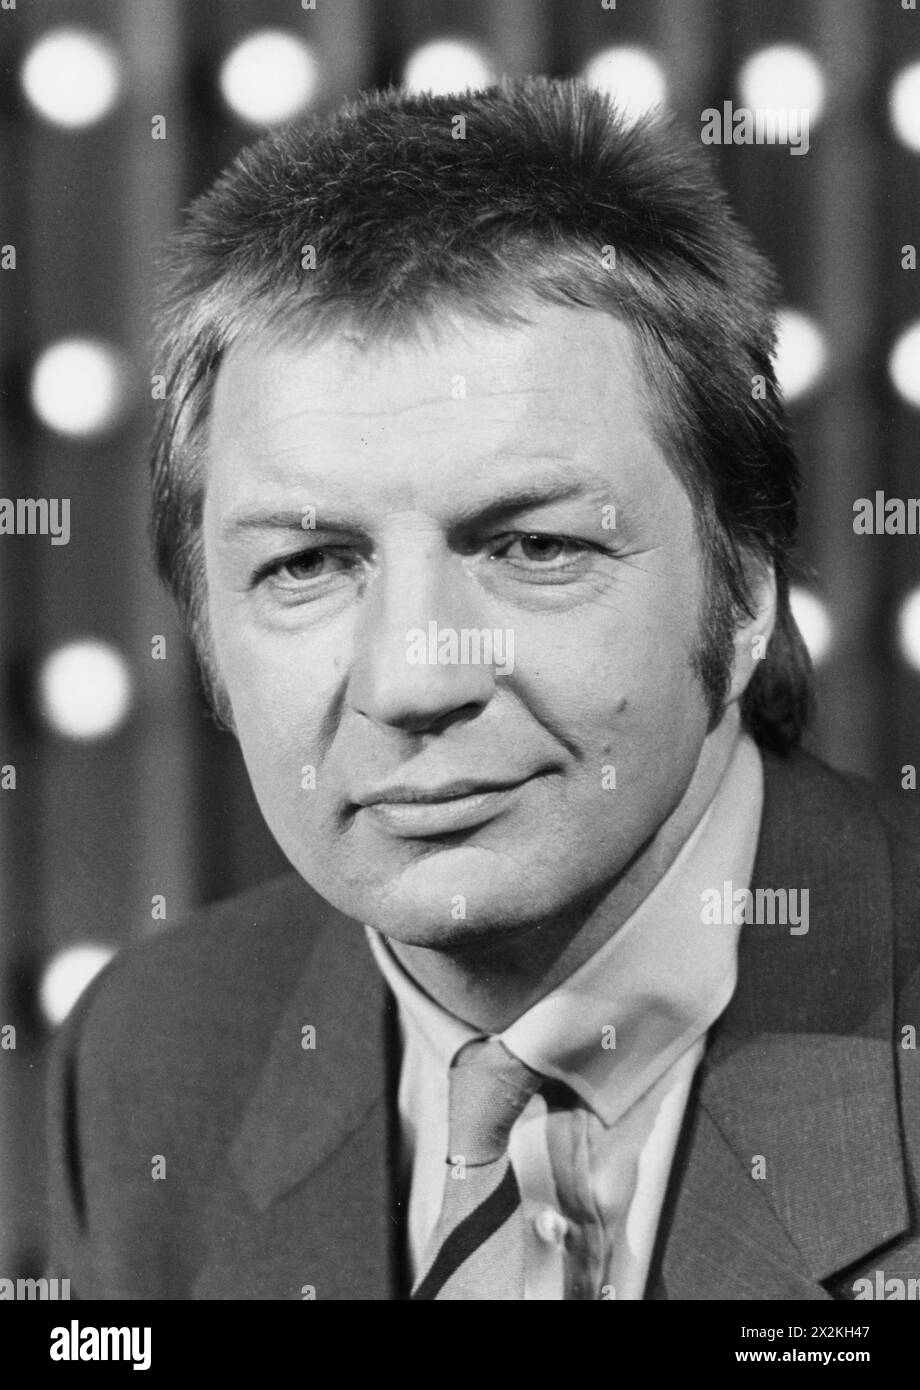 Schneyder, Werner, 25.1.1937 - 2.3.2019, Austrian cabaret artist and presenter, ADDITIONAL-RIGHTS-CLEARANCE-INFO-NOT-AVAILABLE Stock Photo